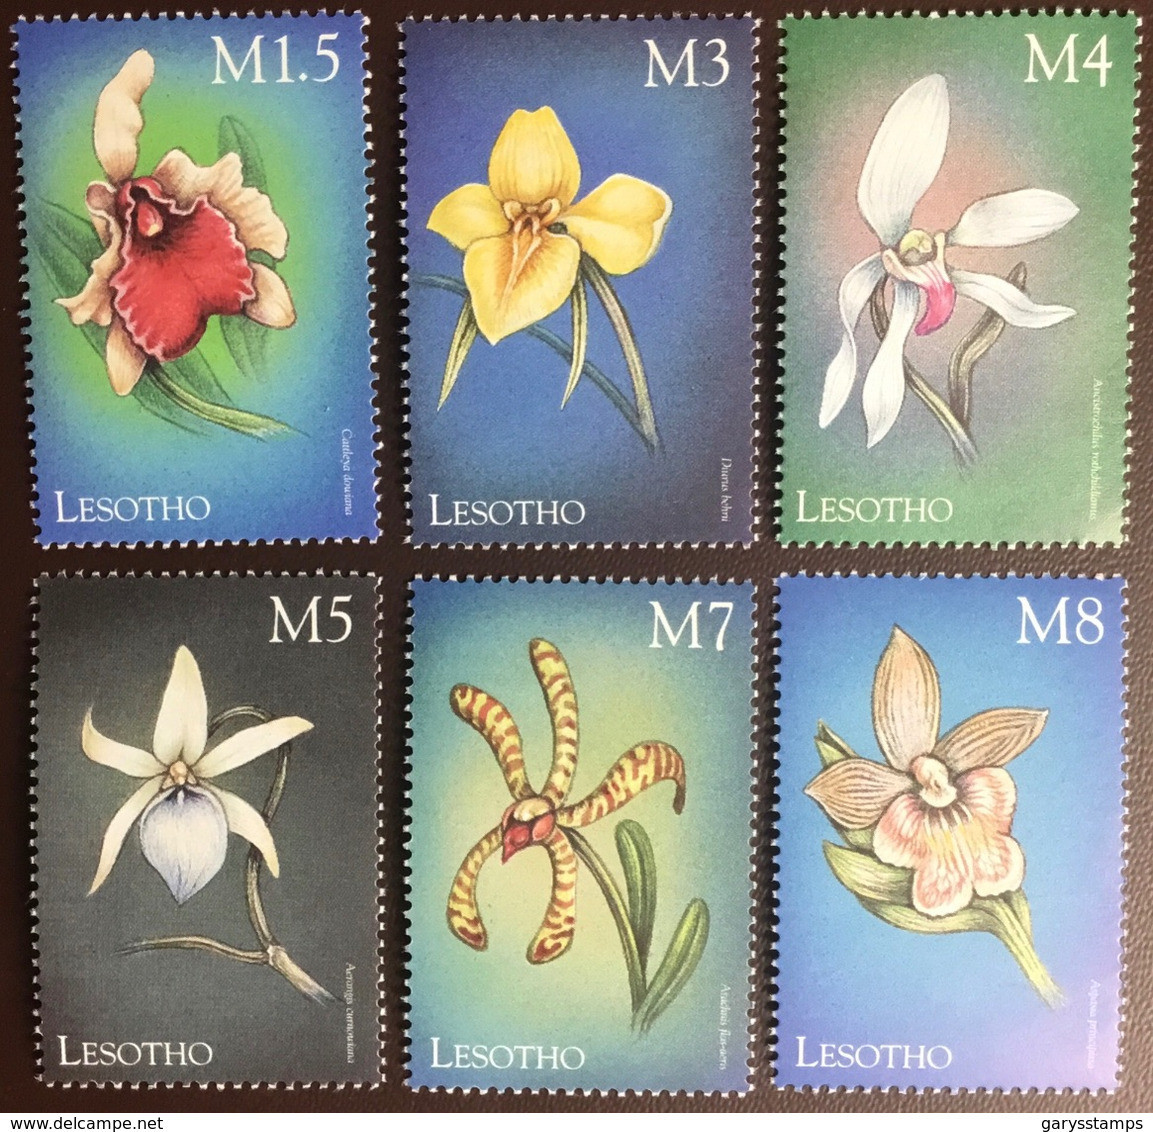 Lesotho 1999 Orchids Flowers MNH - Orquideas